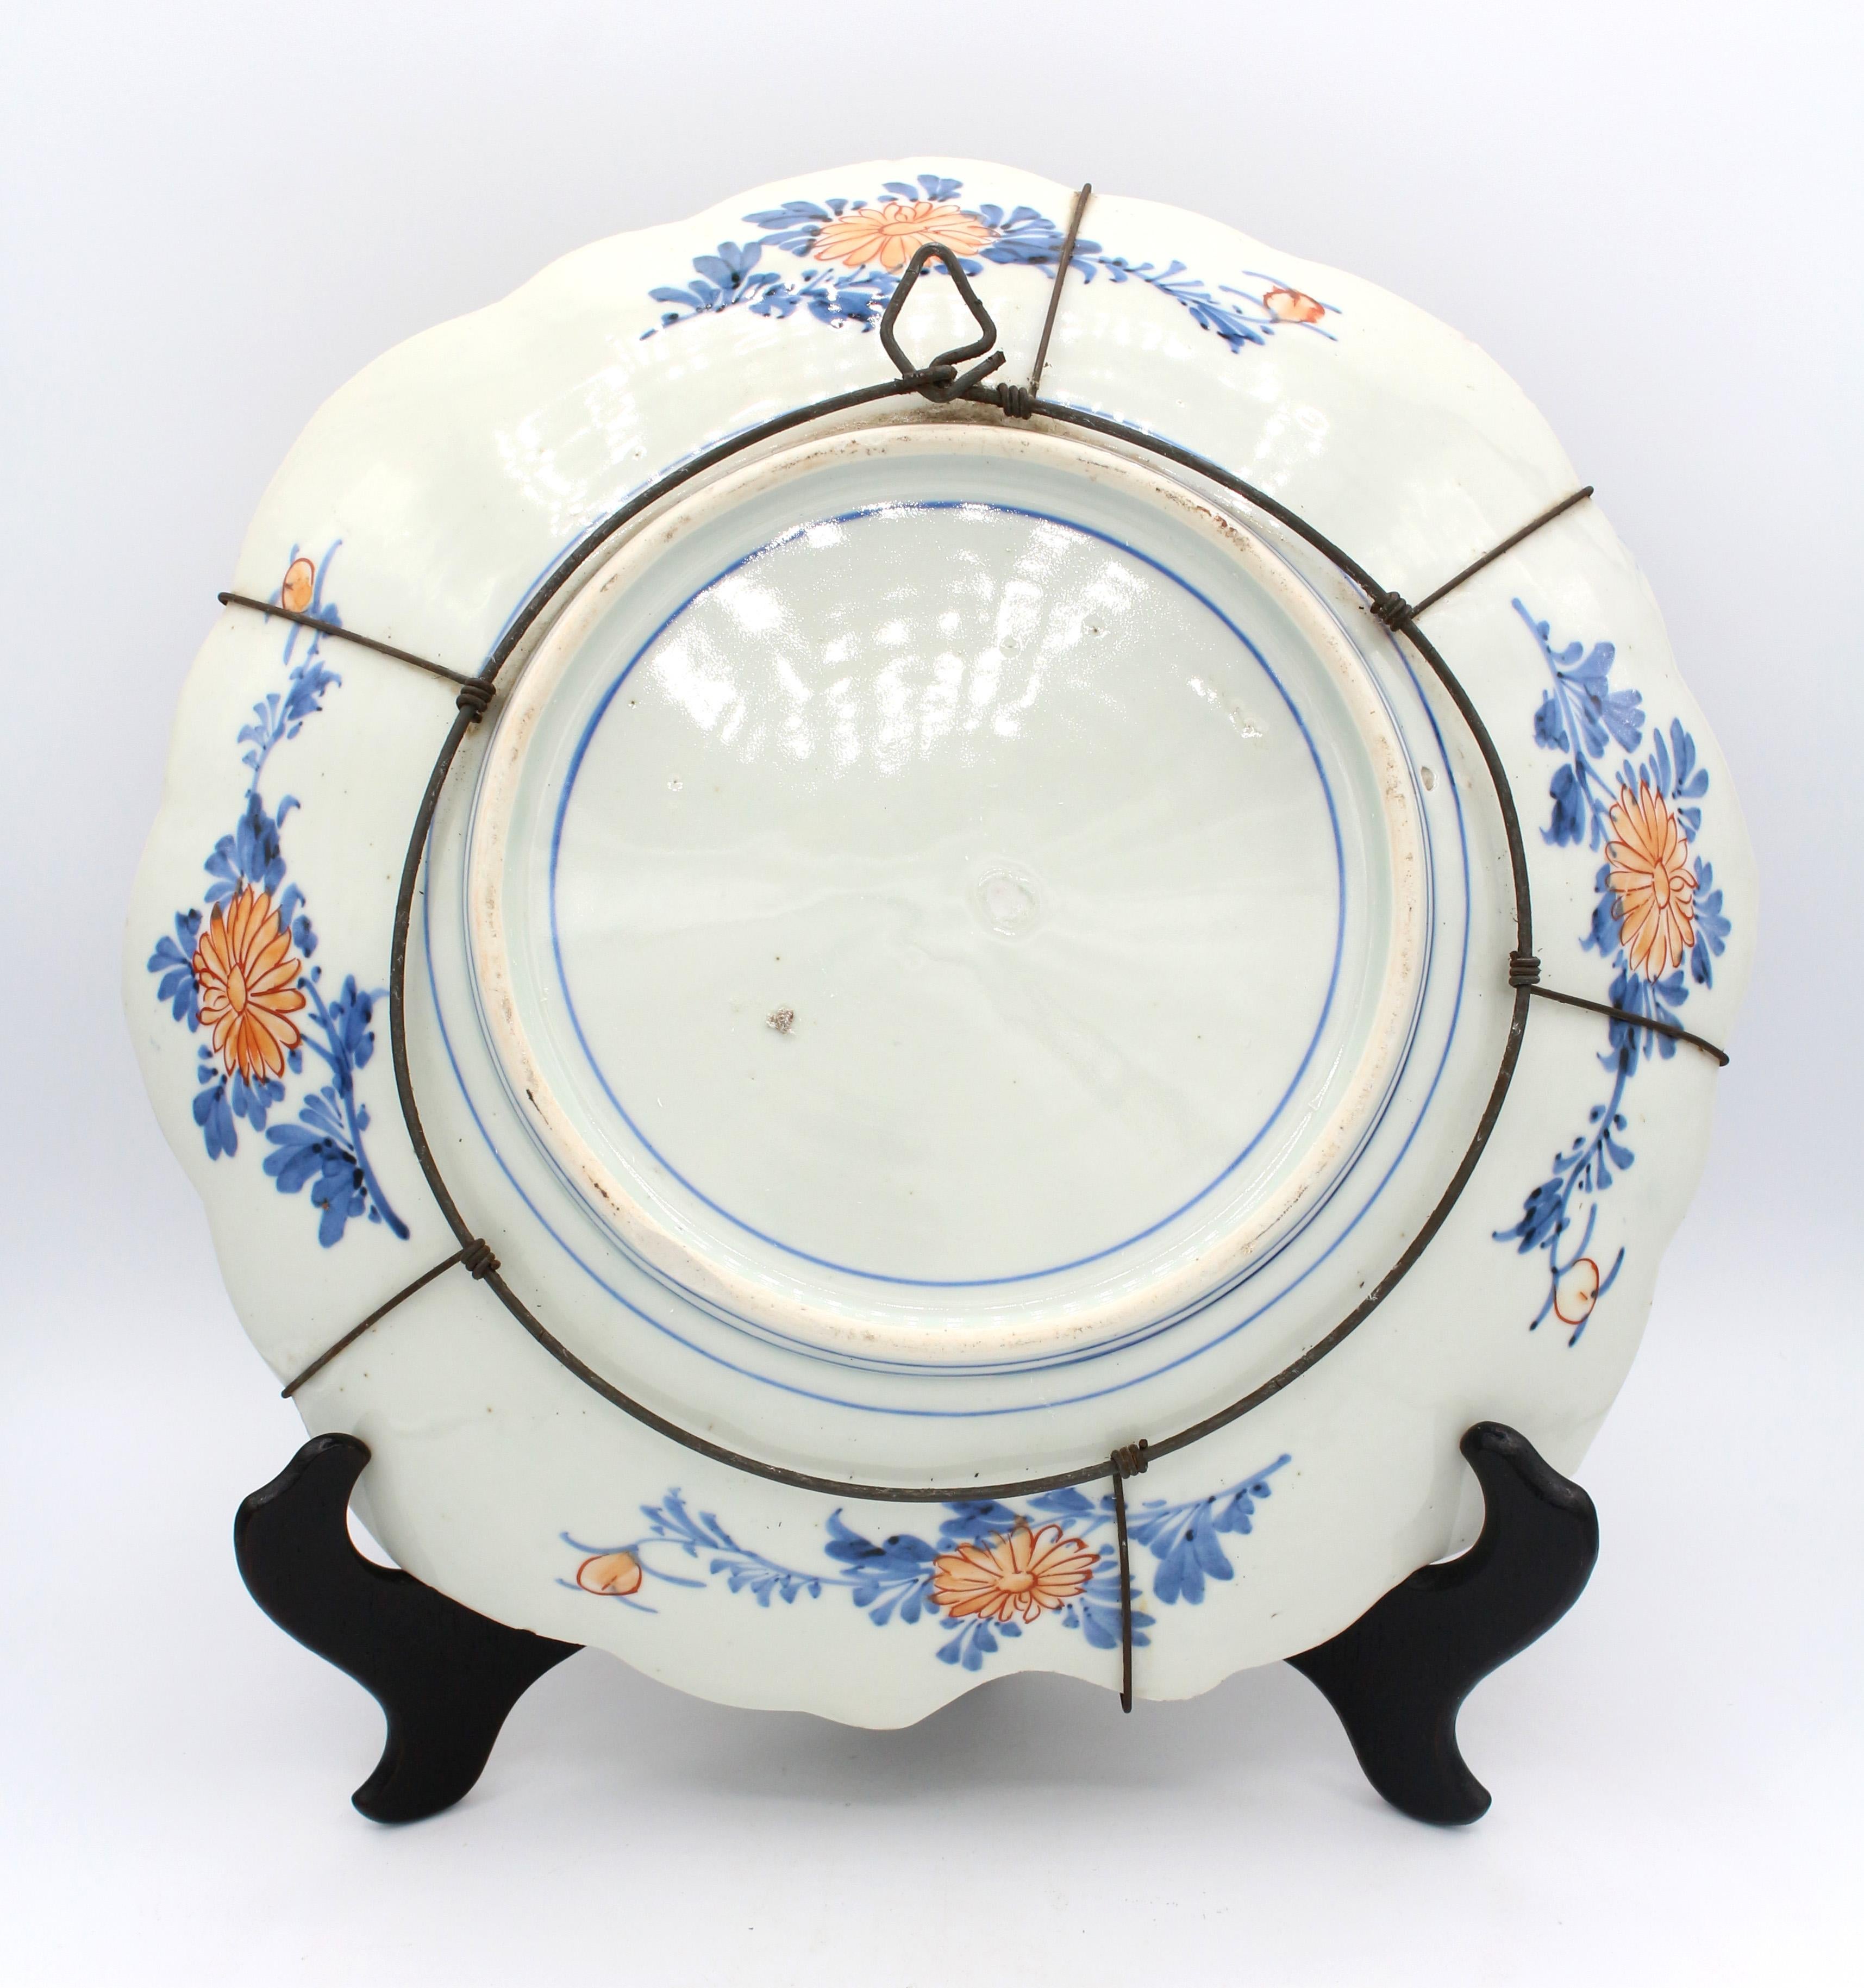 Circa 1860 lozenge shaped Imari Charger, central medallion with birds surrounded by alternating panels with an ancient tortoise & groups of cranes. The reverse well painted. Base rim chip; a few minute chips on reverse & one small reverse